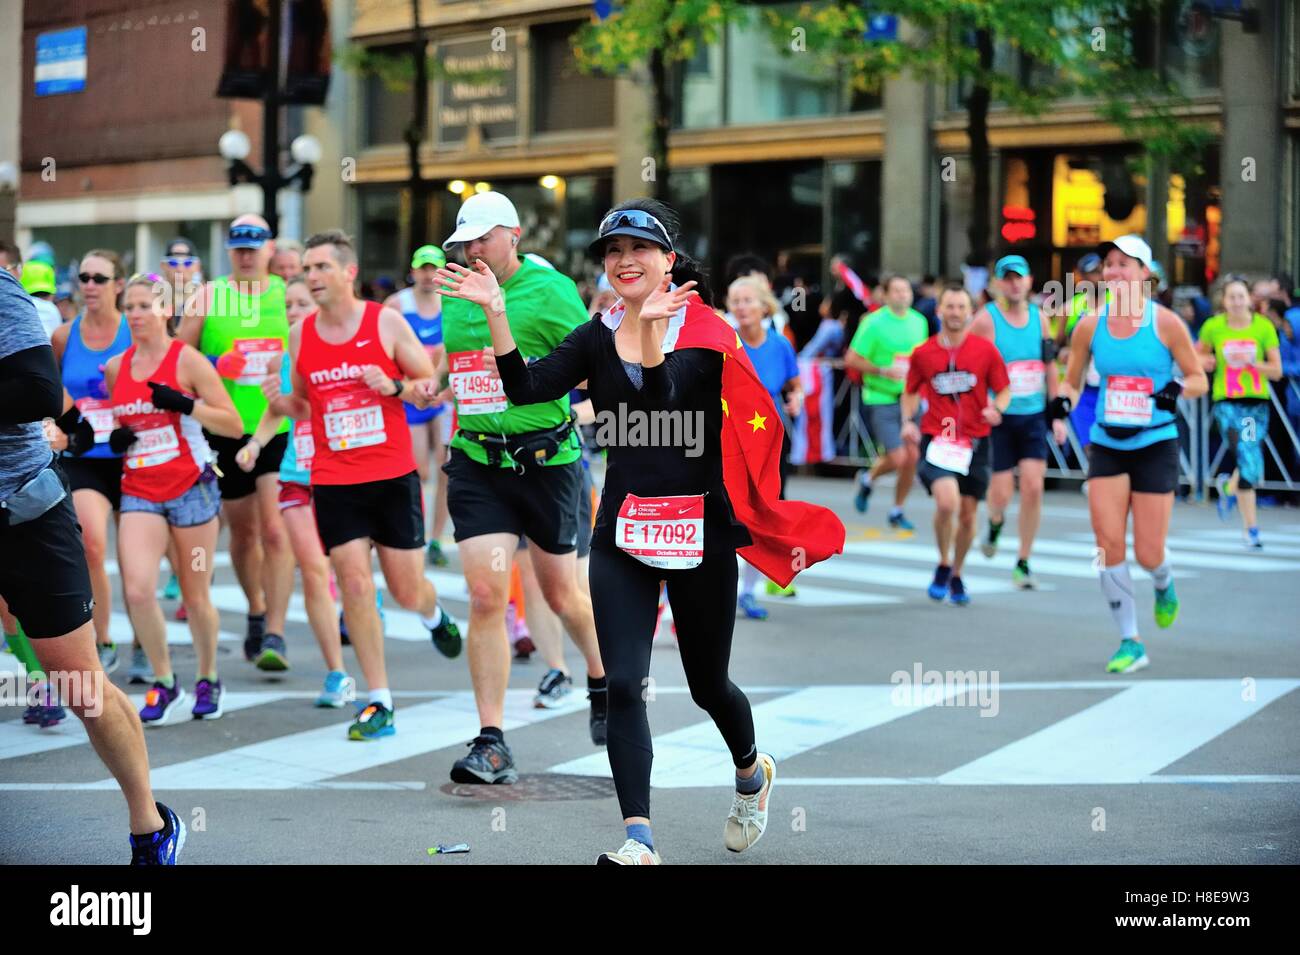 Draped in her country's flag, Fan Zhang of China negotiating a course turn during the 2016 Chicago Marathon. Chicago, Illinois, USA. Stock Photo